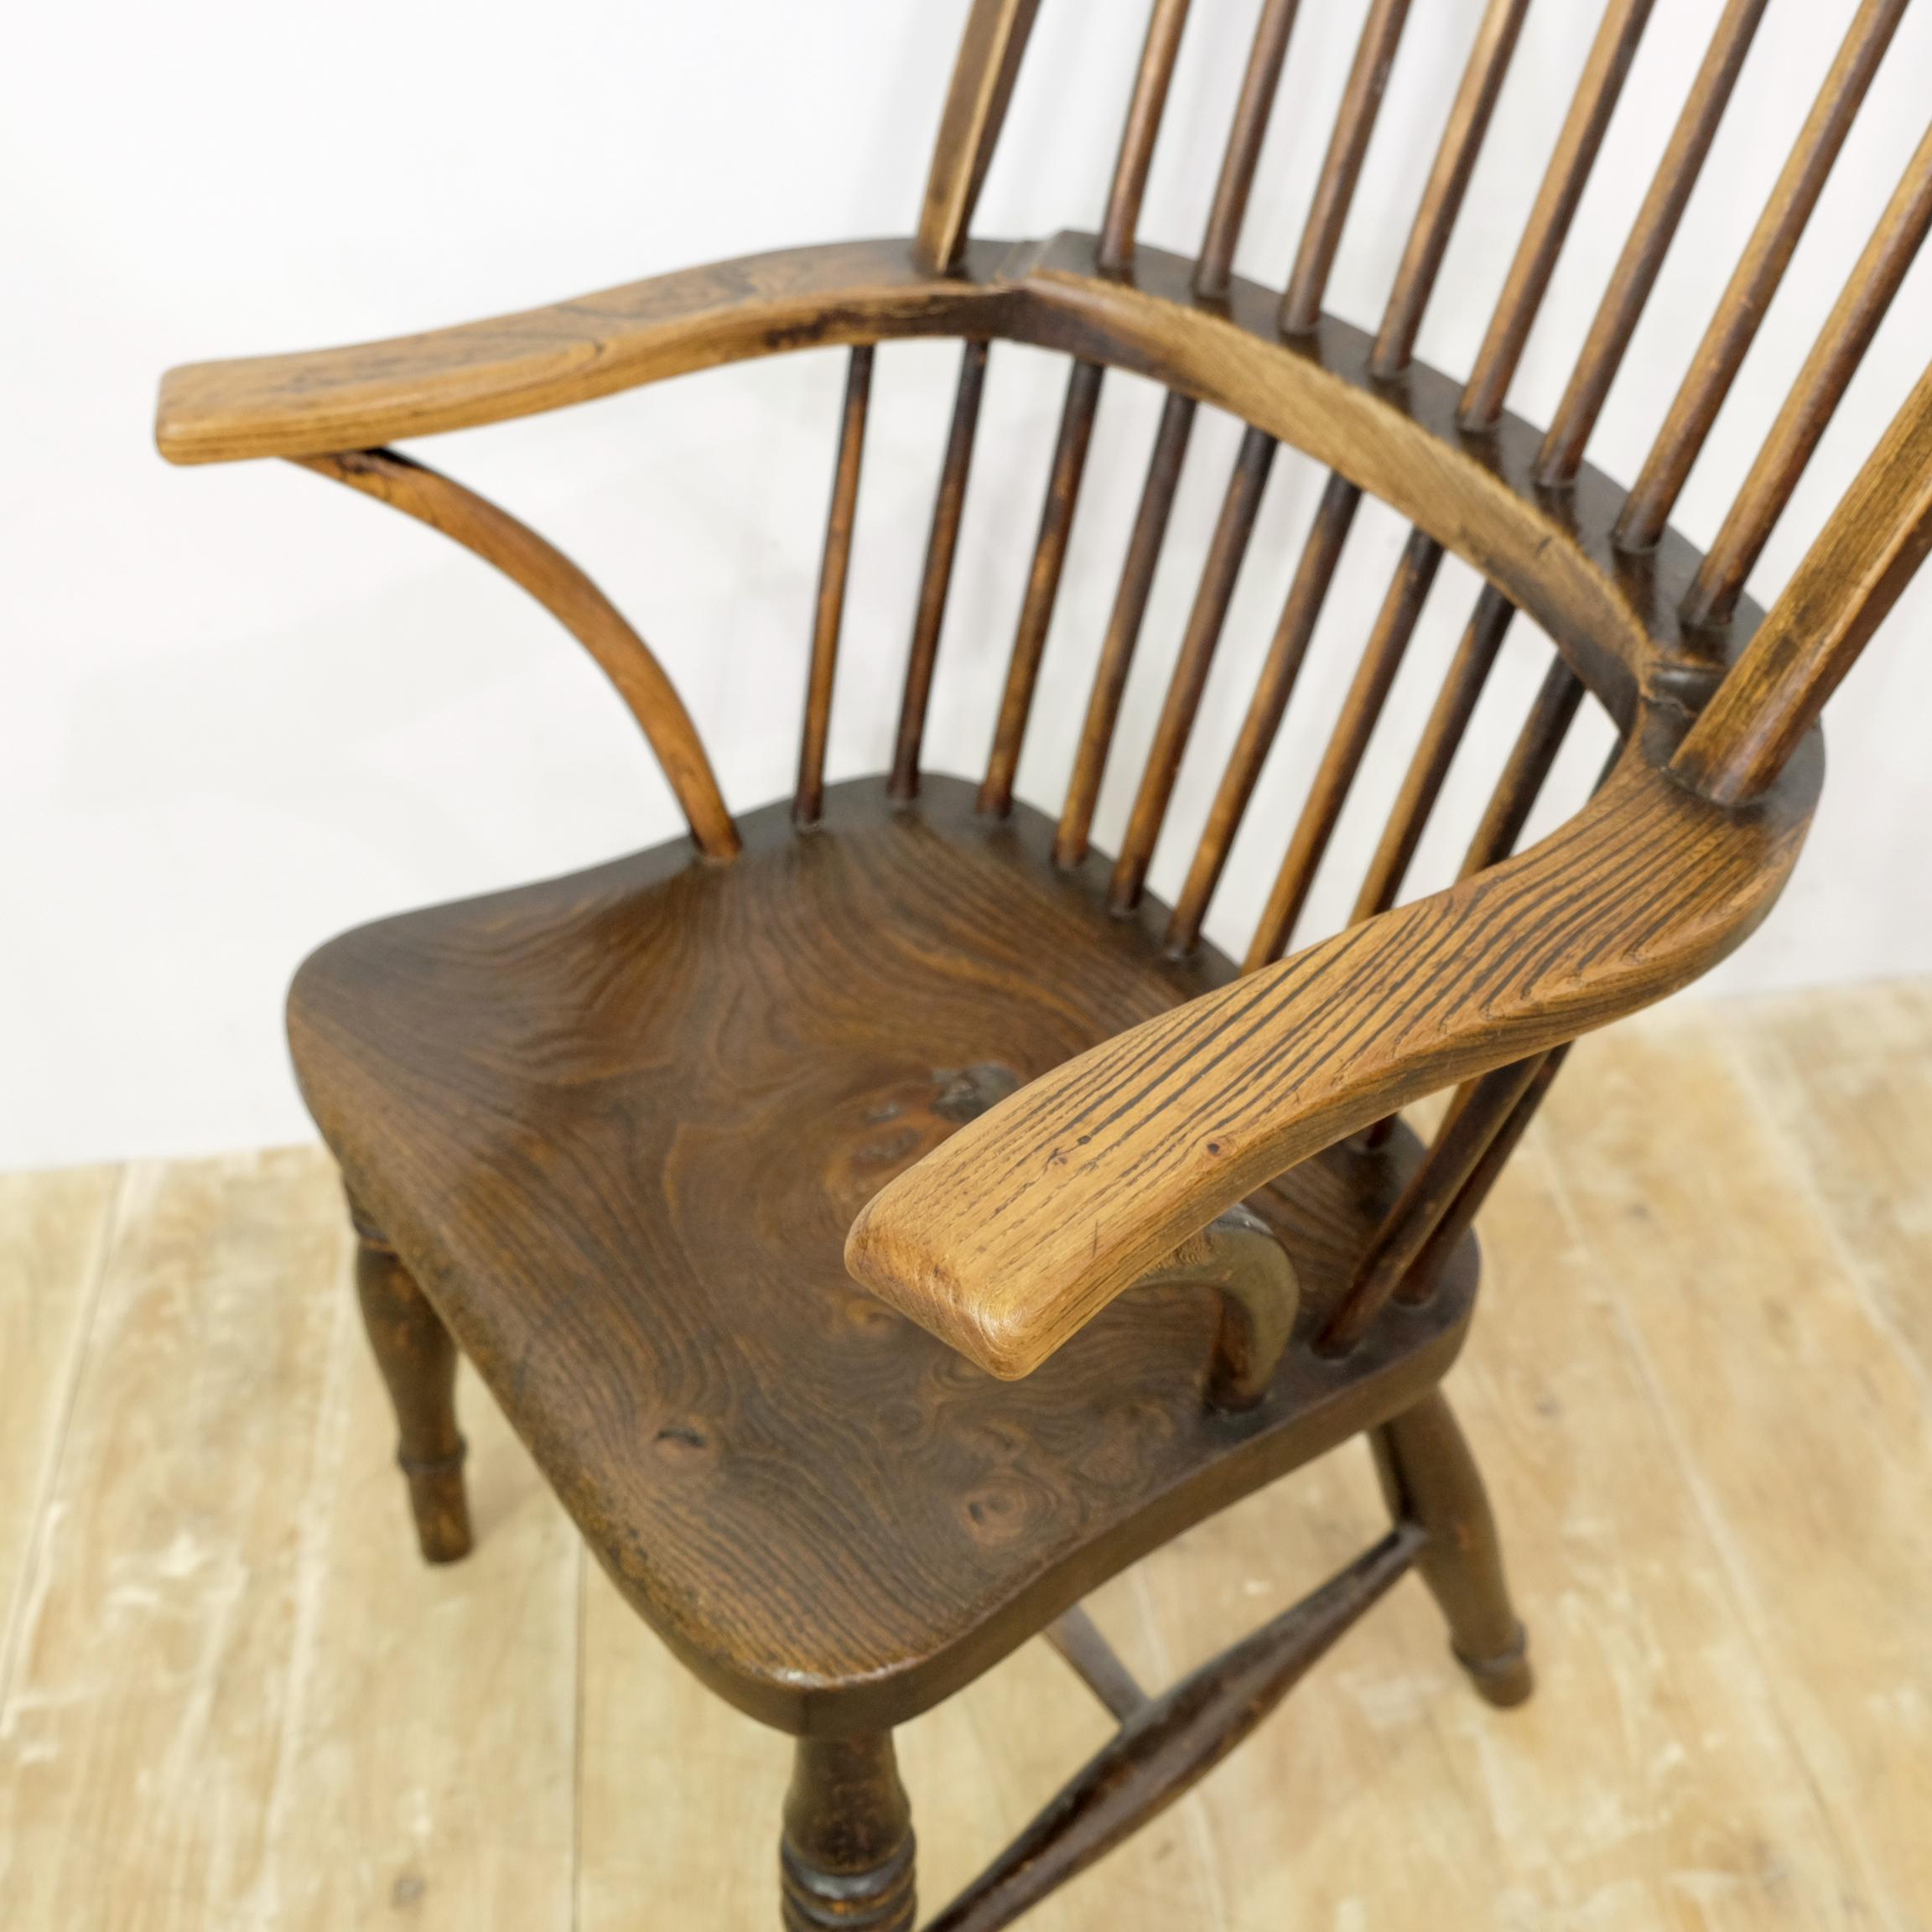 Hand-Carved West Country Windsor Armchair, English, Devonshire, Elm and Ash, 1830s Chair